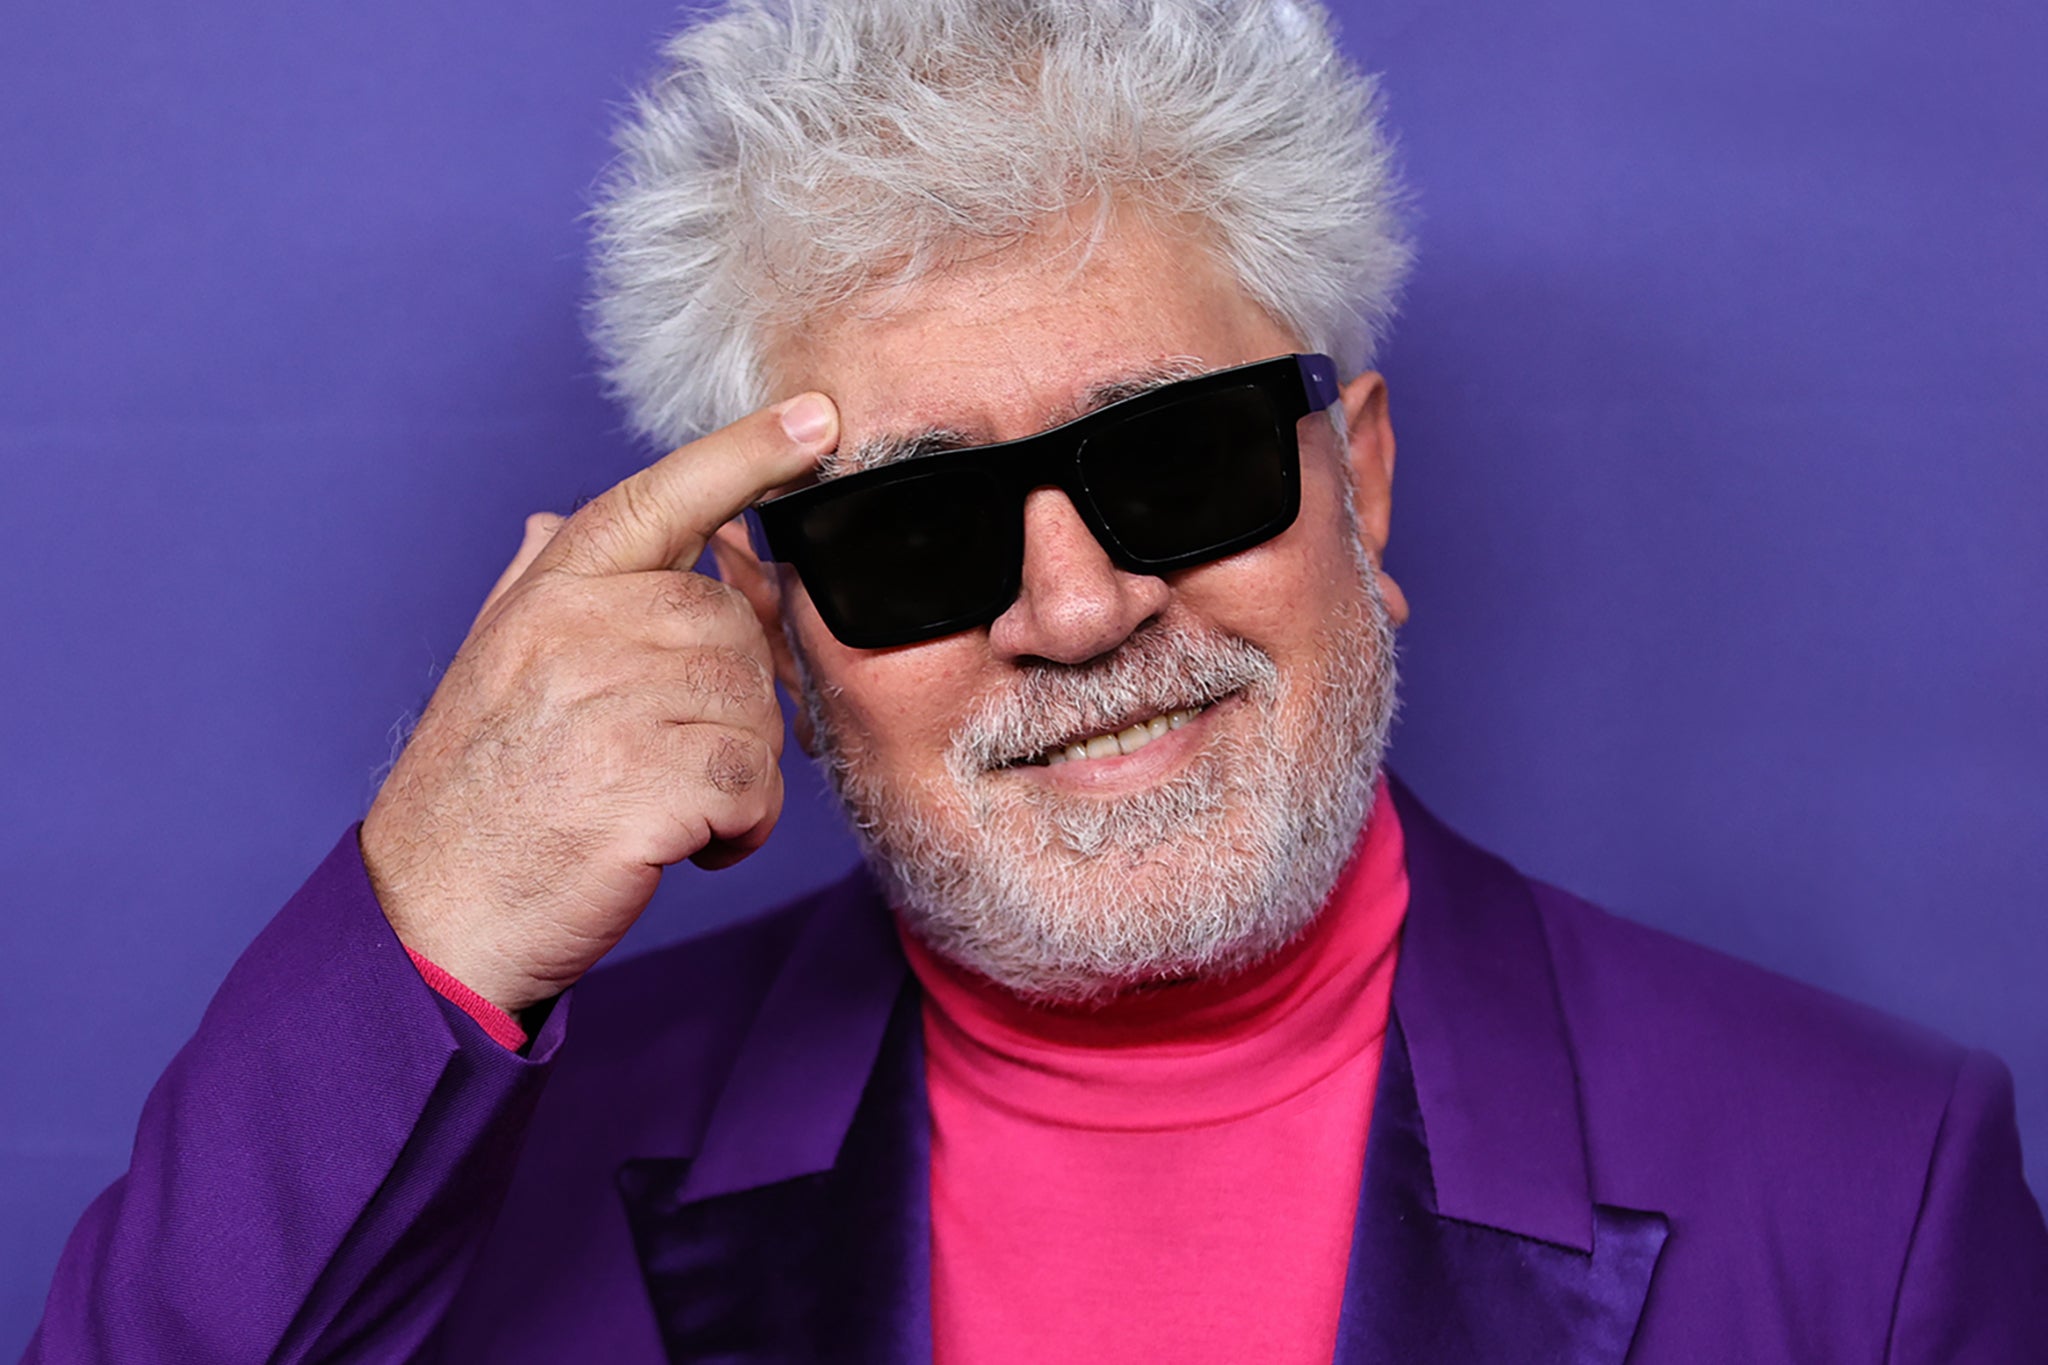 Pedro Almodovar wanted to do a different kind of sexy